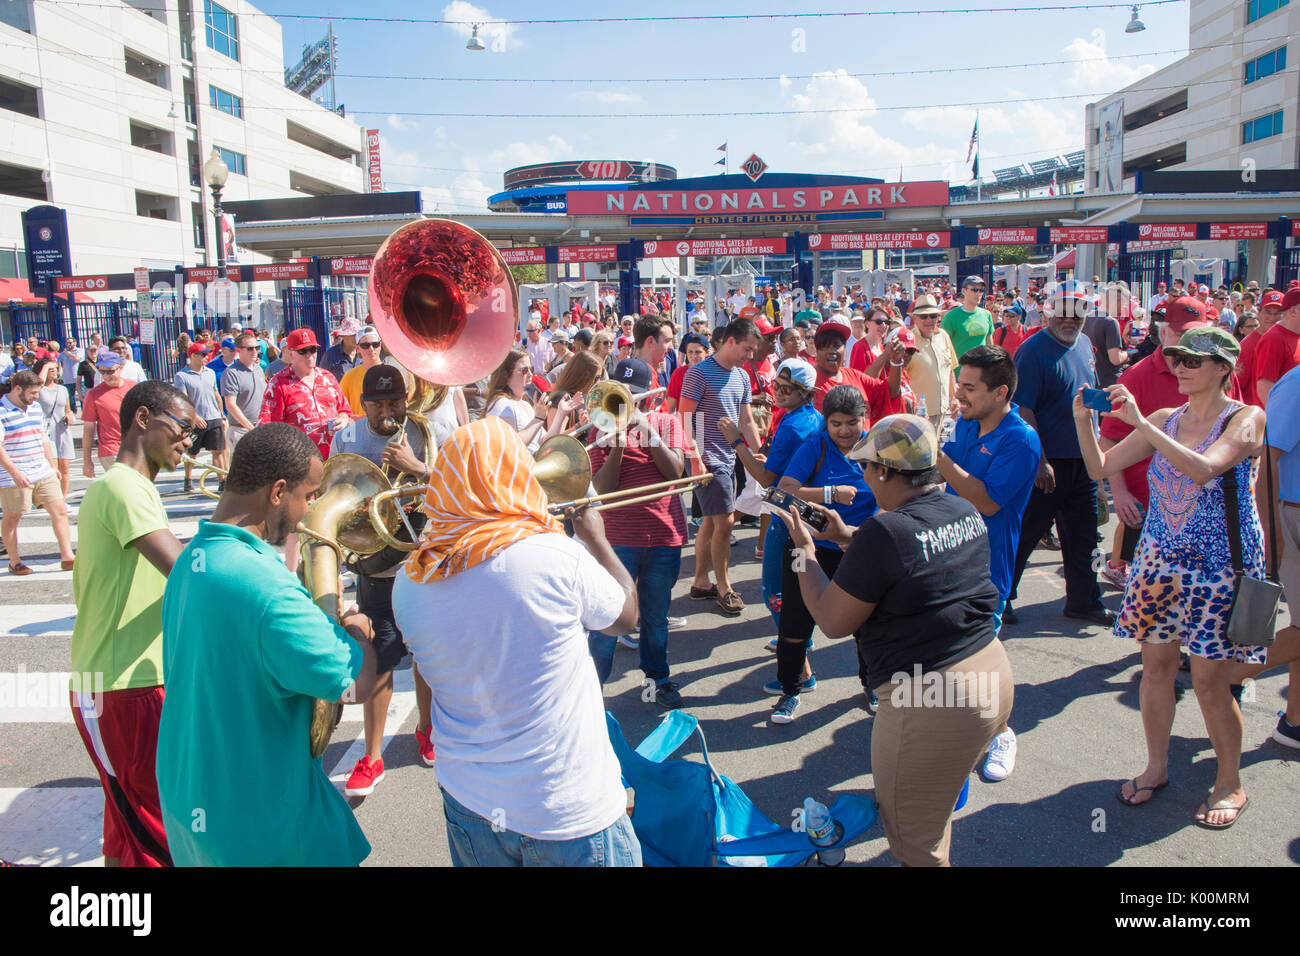 Street muscians play outside Nationals Park in Washington, DC, as baseball fans leave the stadium. Stock Photo